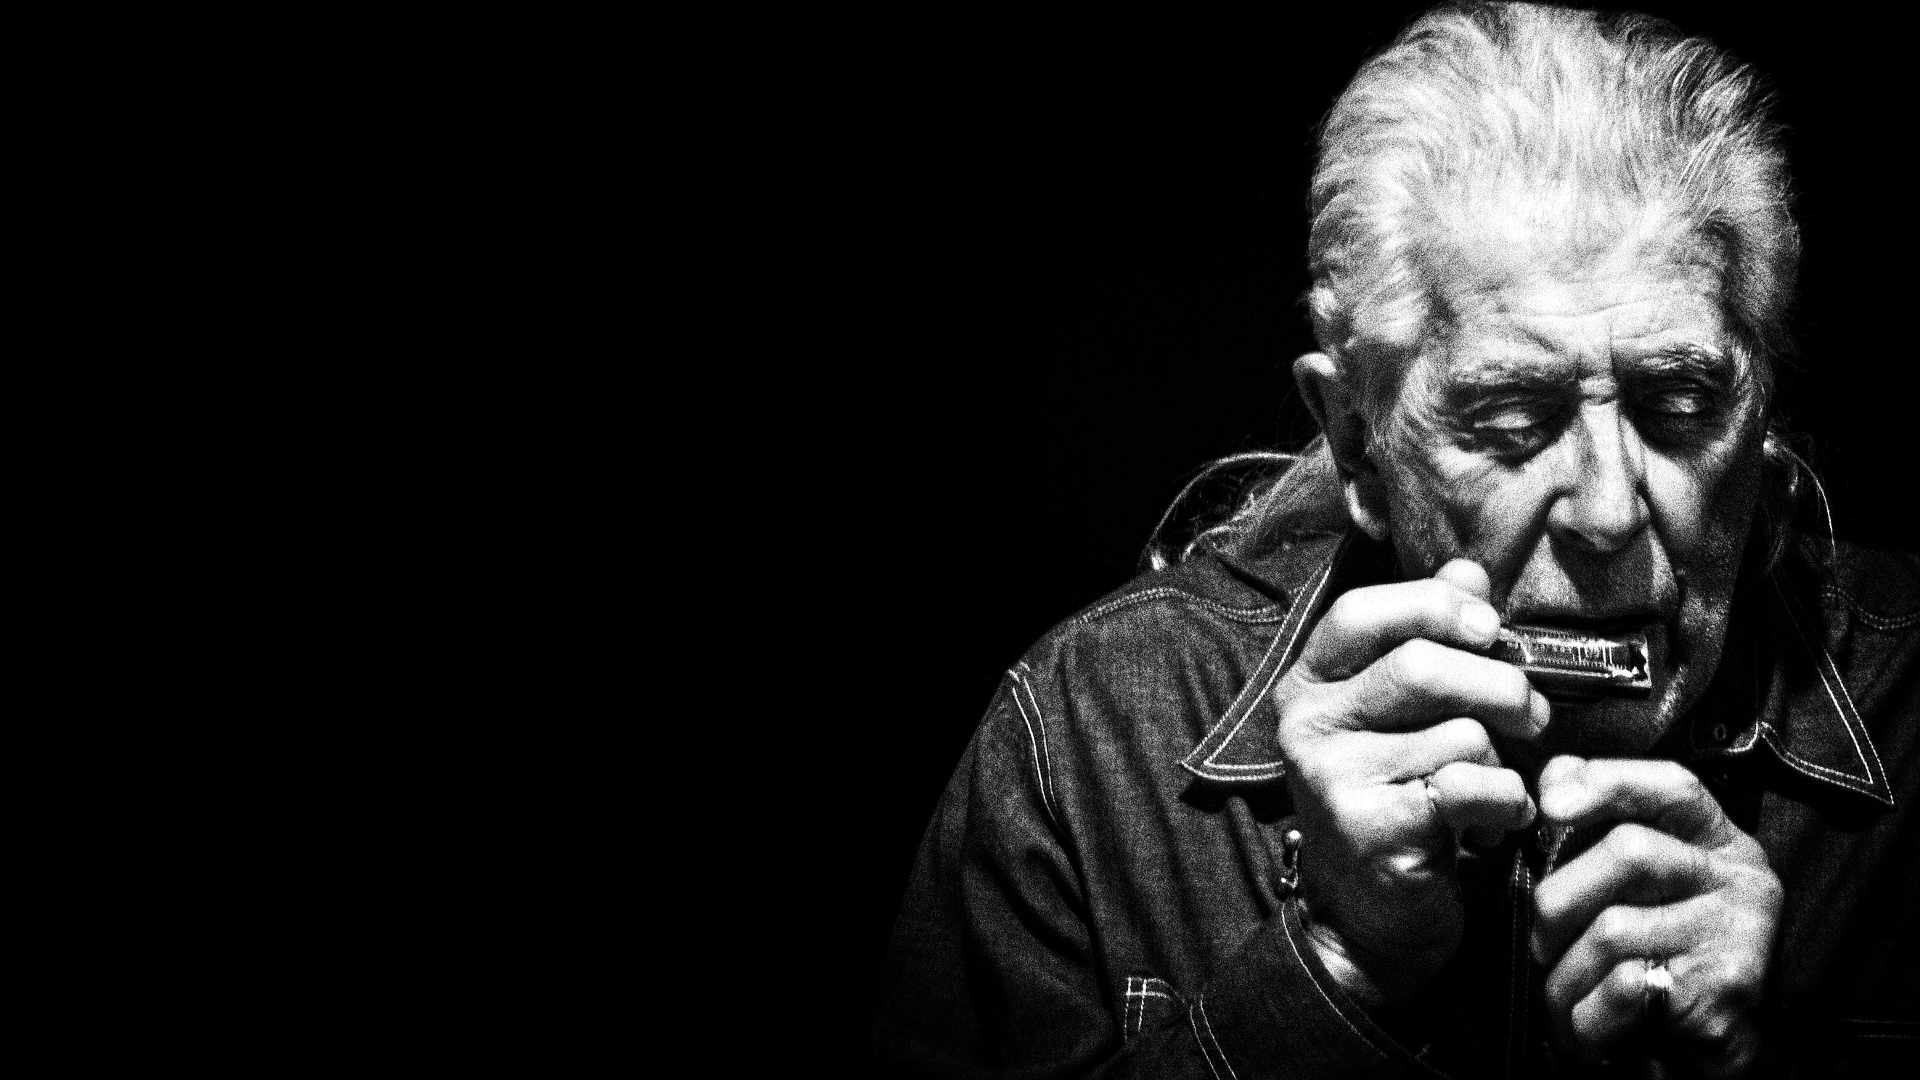 John Mayall Backgrounds, Compatible - PC, Mobile, Gadgets| 1920x1080 px